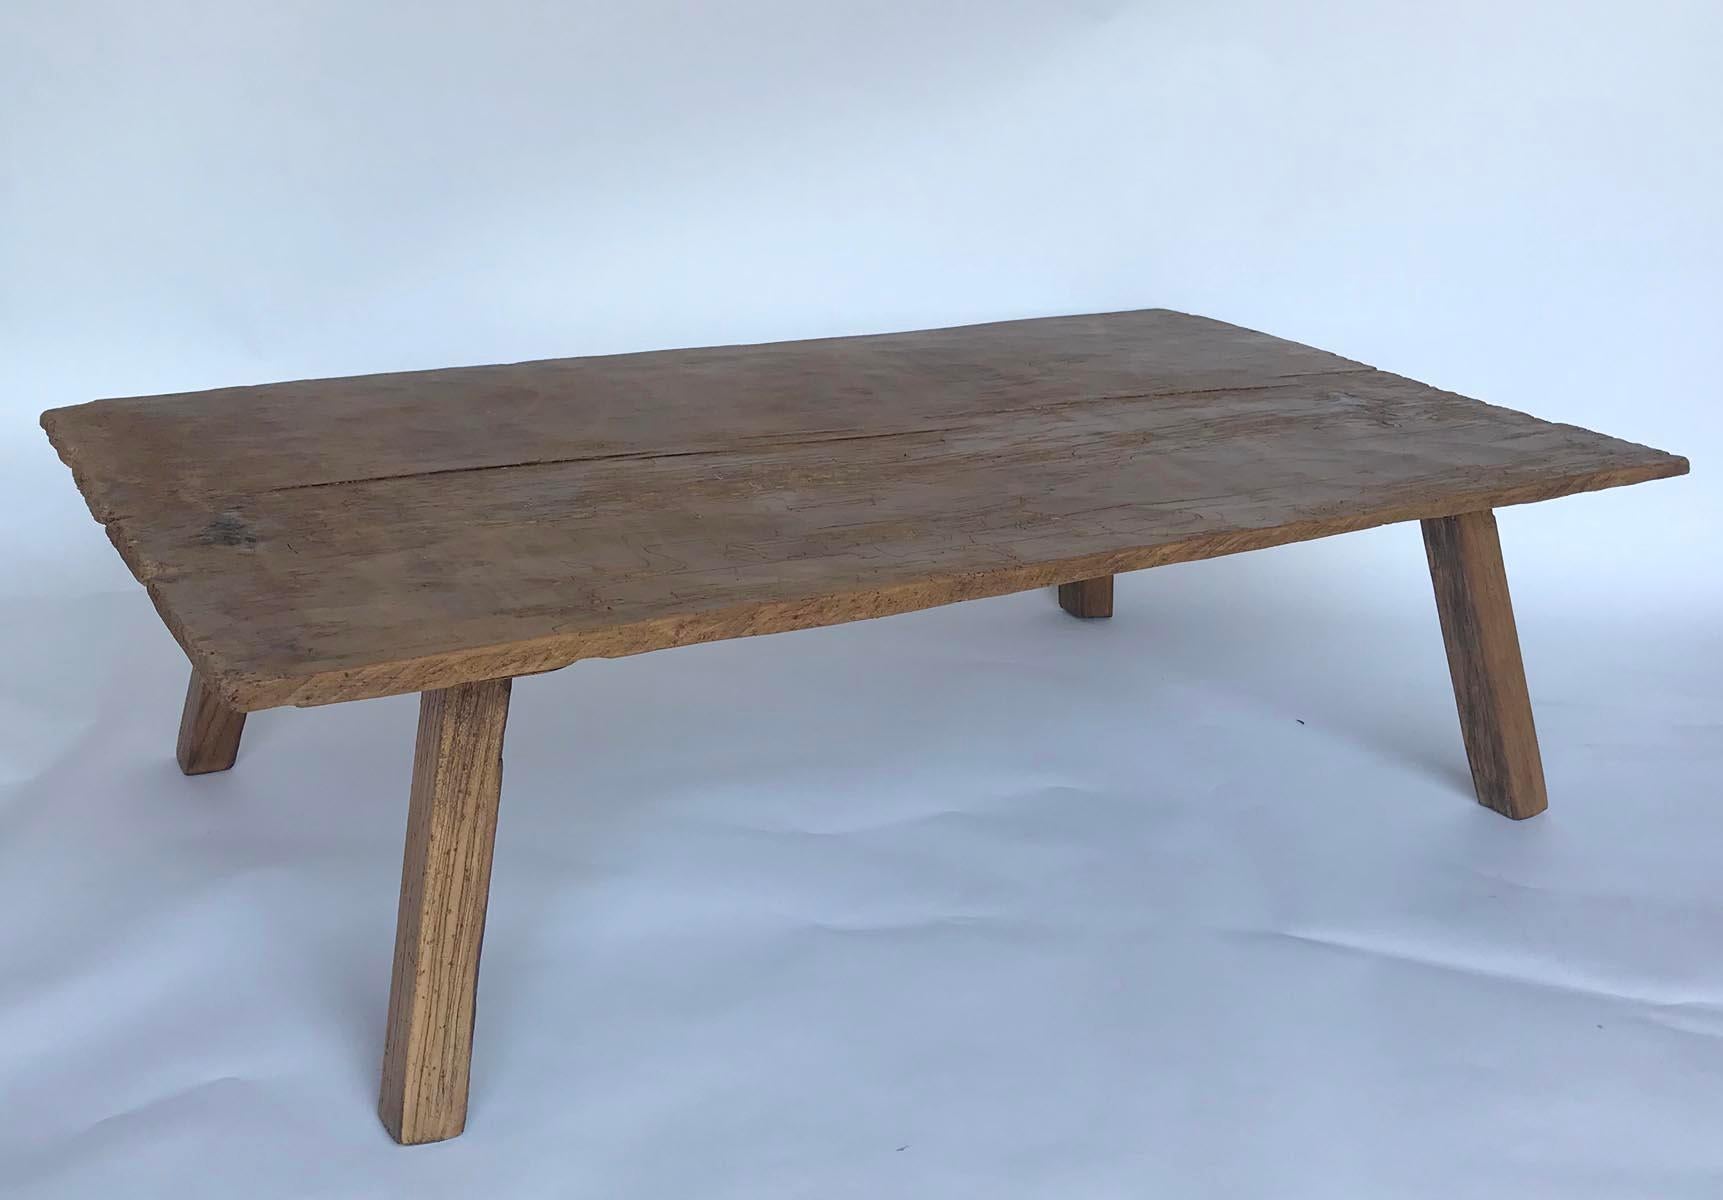 Coffee table made with an antique, very rustic one wide board top from Guatemala. Newer legs have been finished to match the top. Table is hand hewn but flat to place things like glasses and accessories. There are old worm holes in the top showing